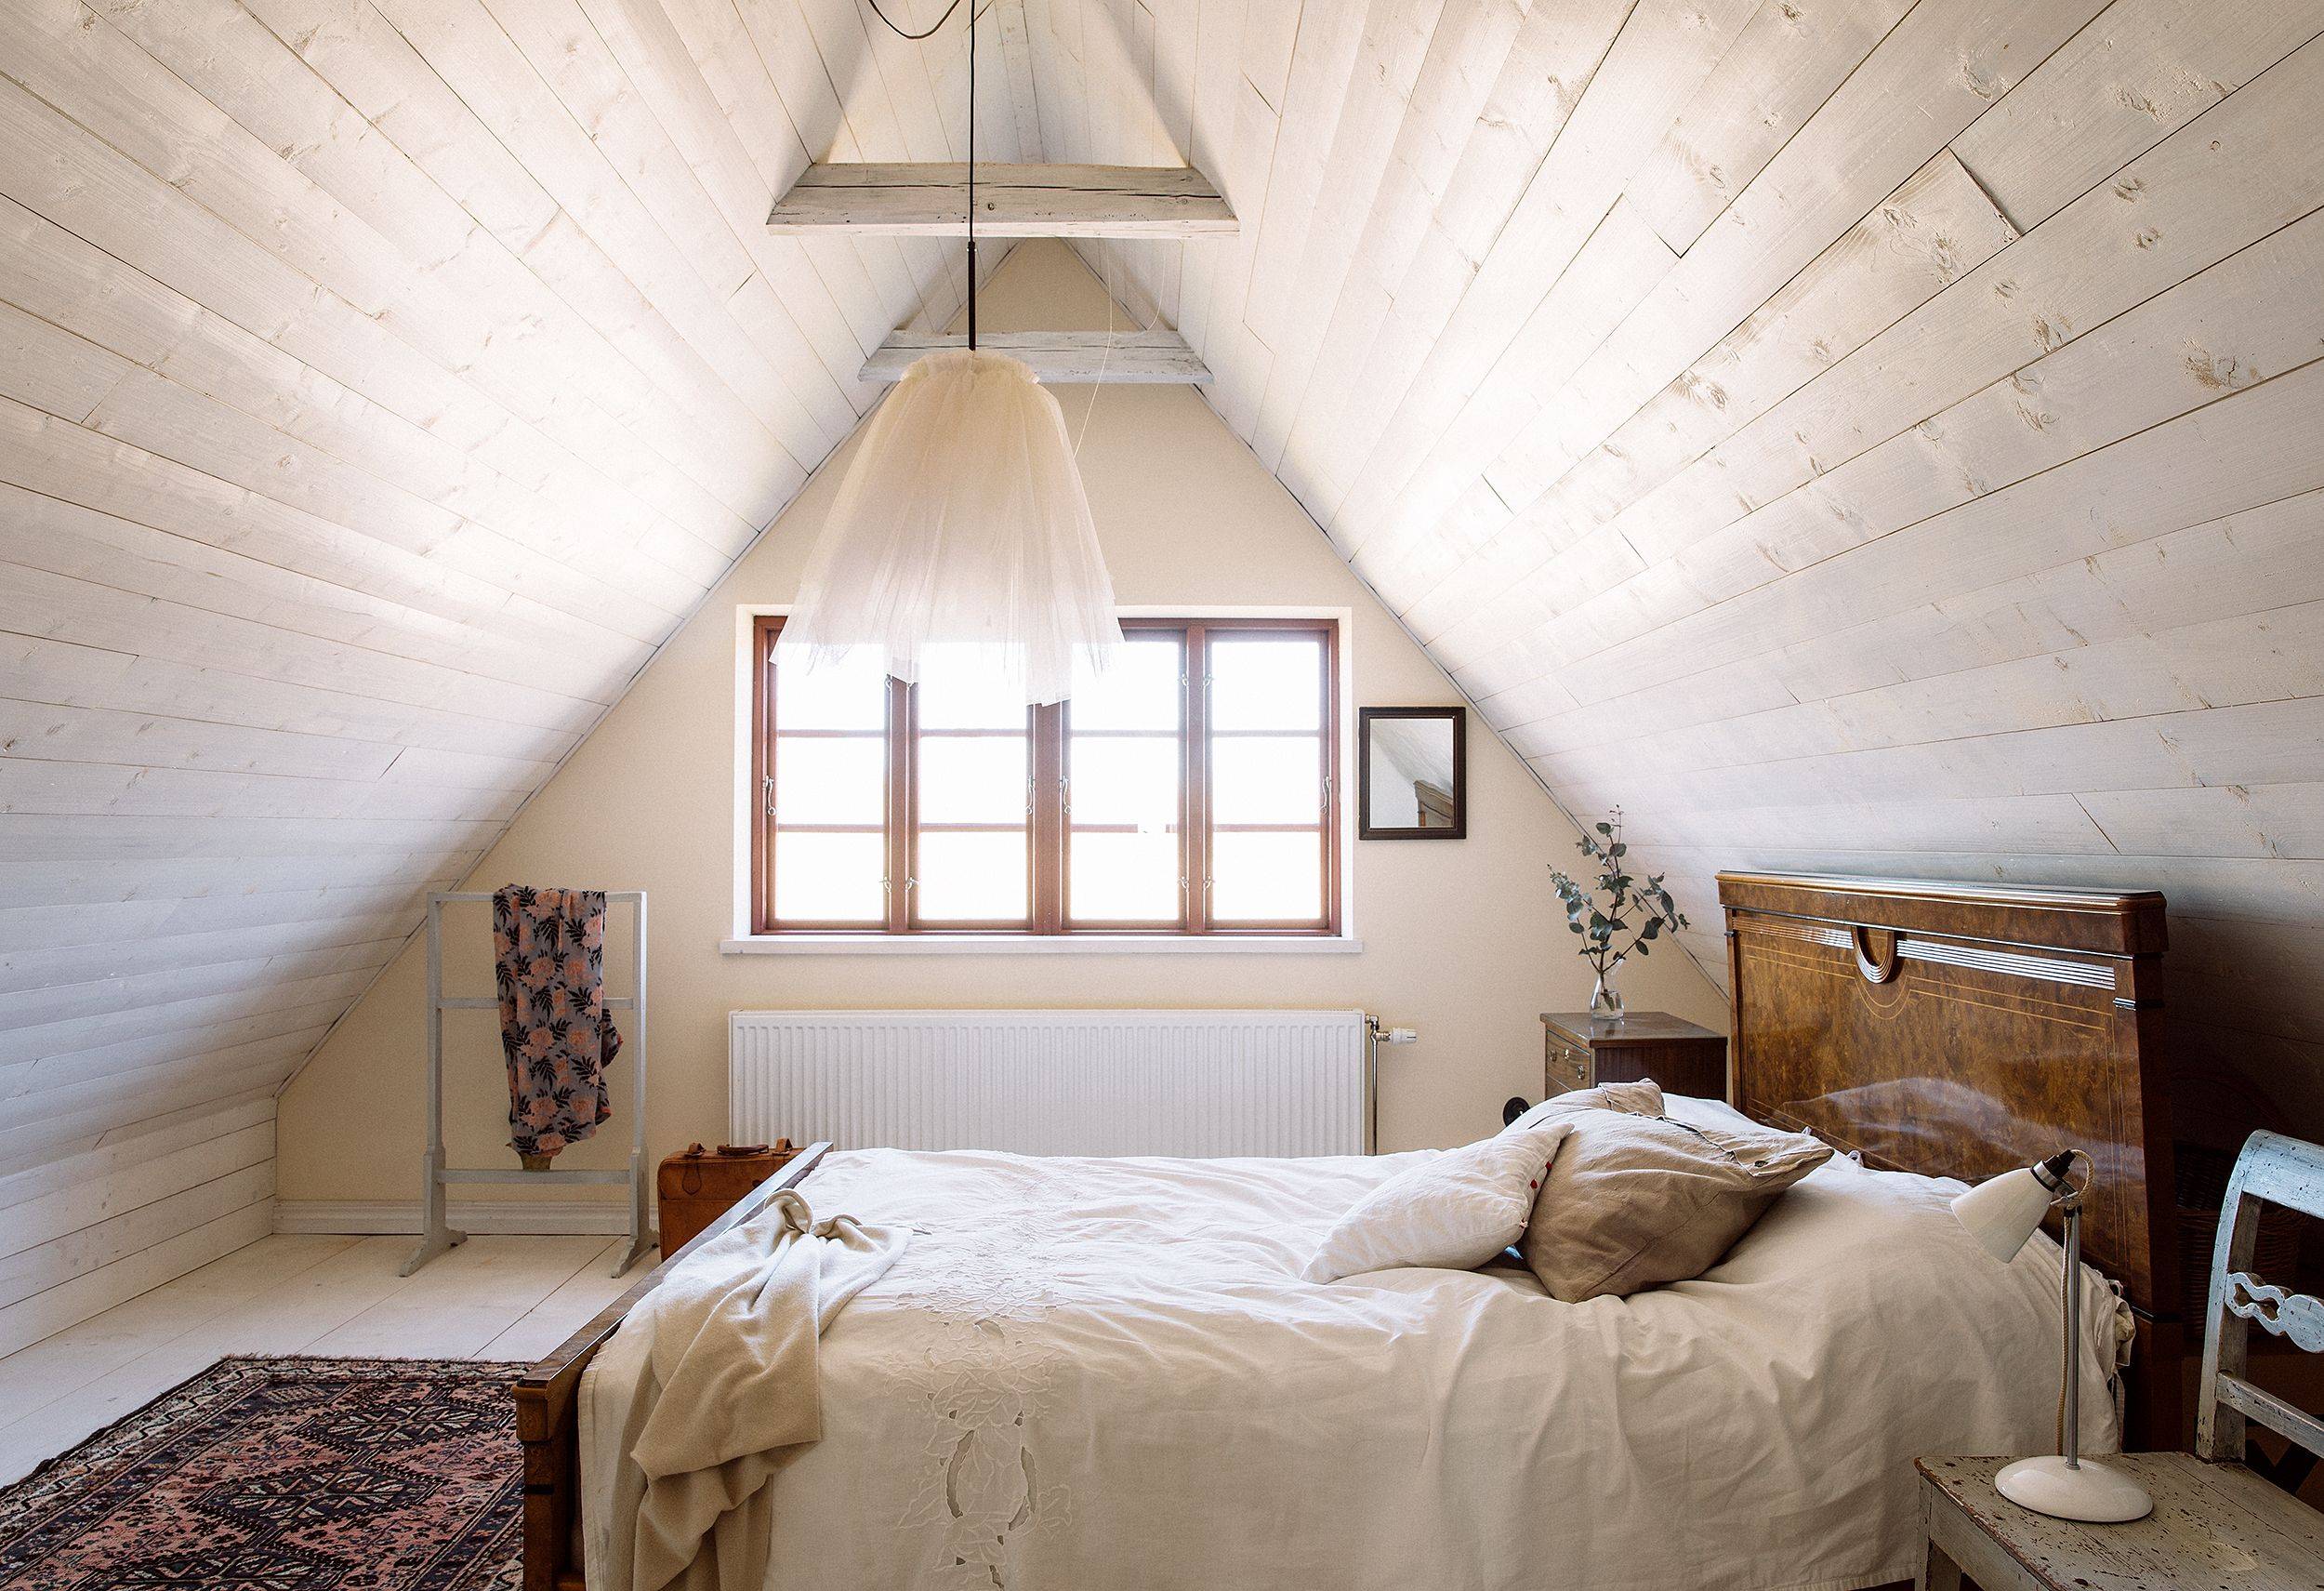 Picturesque attic Bedrooms with Slanted Walls Home Design